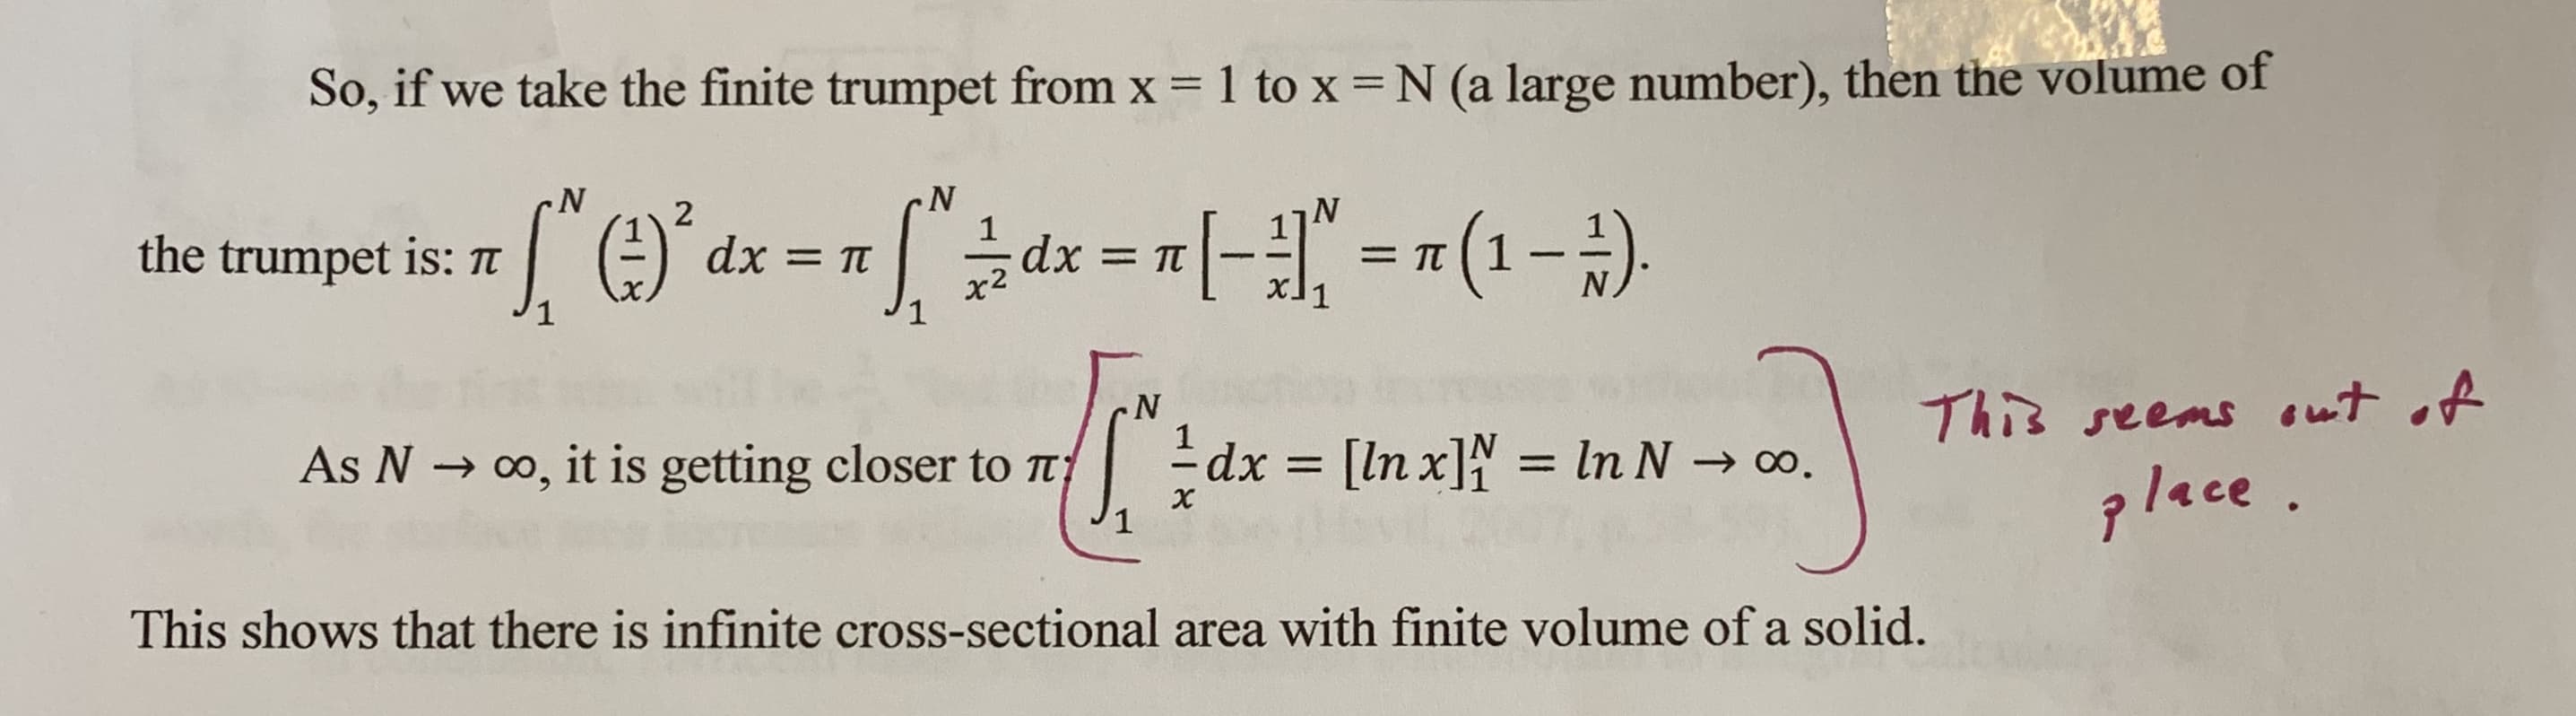 1 to x = N (a large number), then the volume of
So, if we take the finite trumpet from x
N
N
['e
2
the trumpet is: TT
dx TT
dx
=TT
= TT
N
xl1
This seems t A
N
dx [ln x]N = In N -
co, it is getting closer to t
= ln N
As N
0o.
lace
This shows that there is infinite cross-sectional area with finite volume of a solid.
